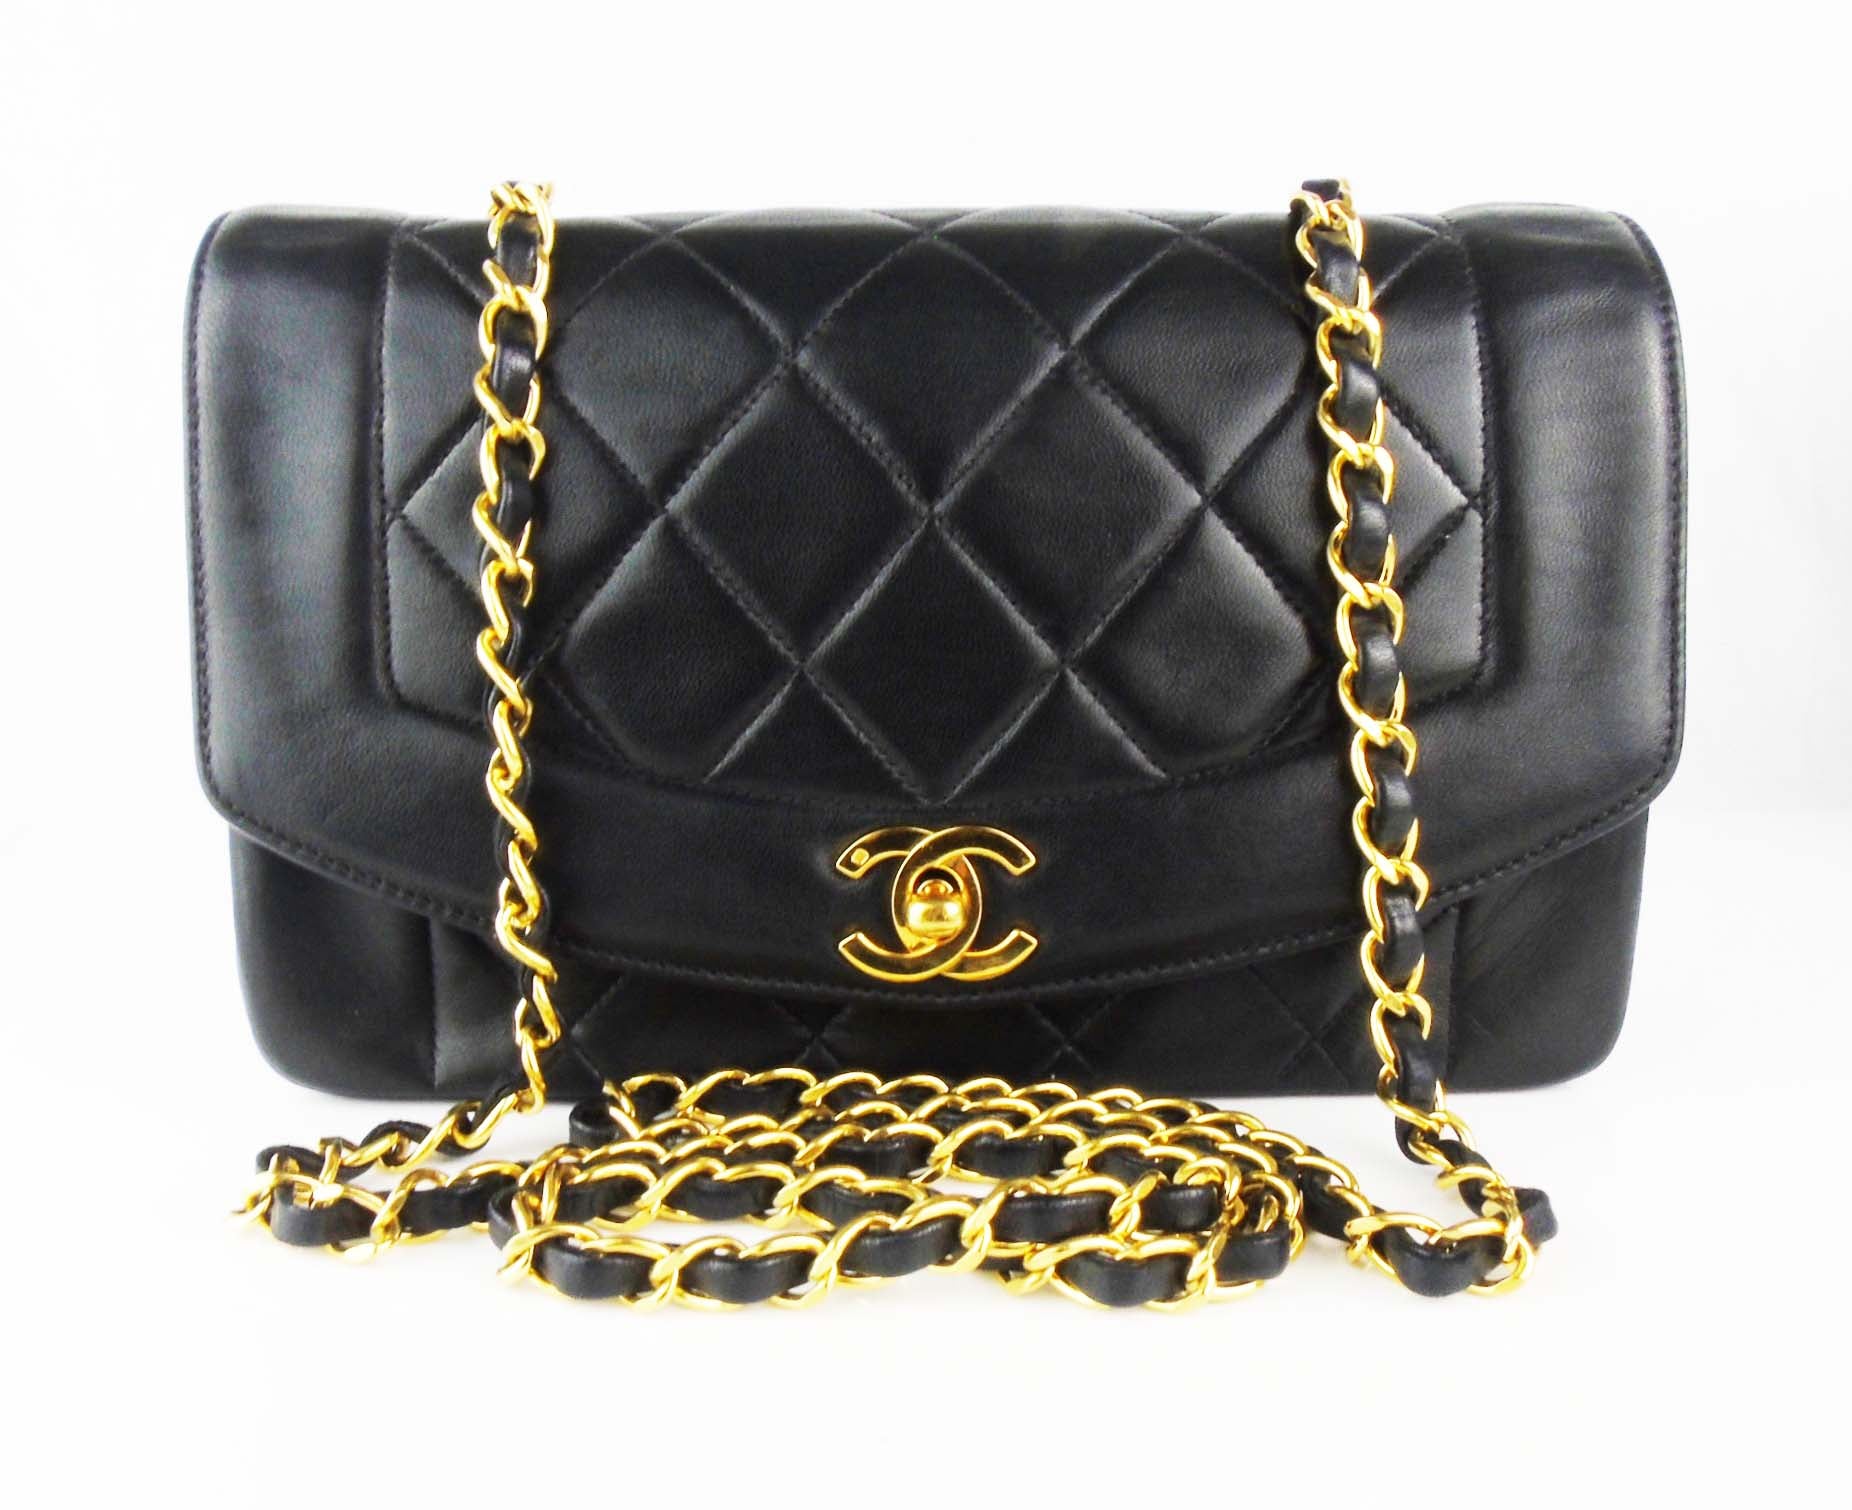 Chanel Vintage Black Lambskin Quilted Maxi Jumbo Flap Bag Chanel